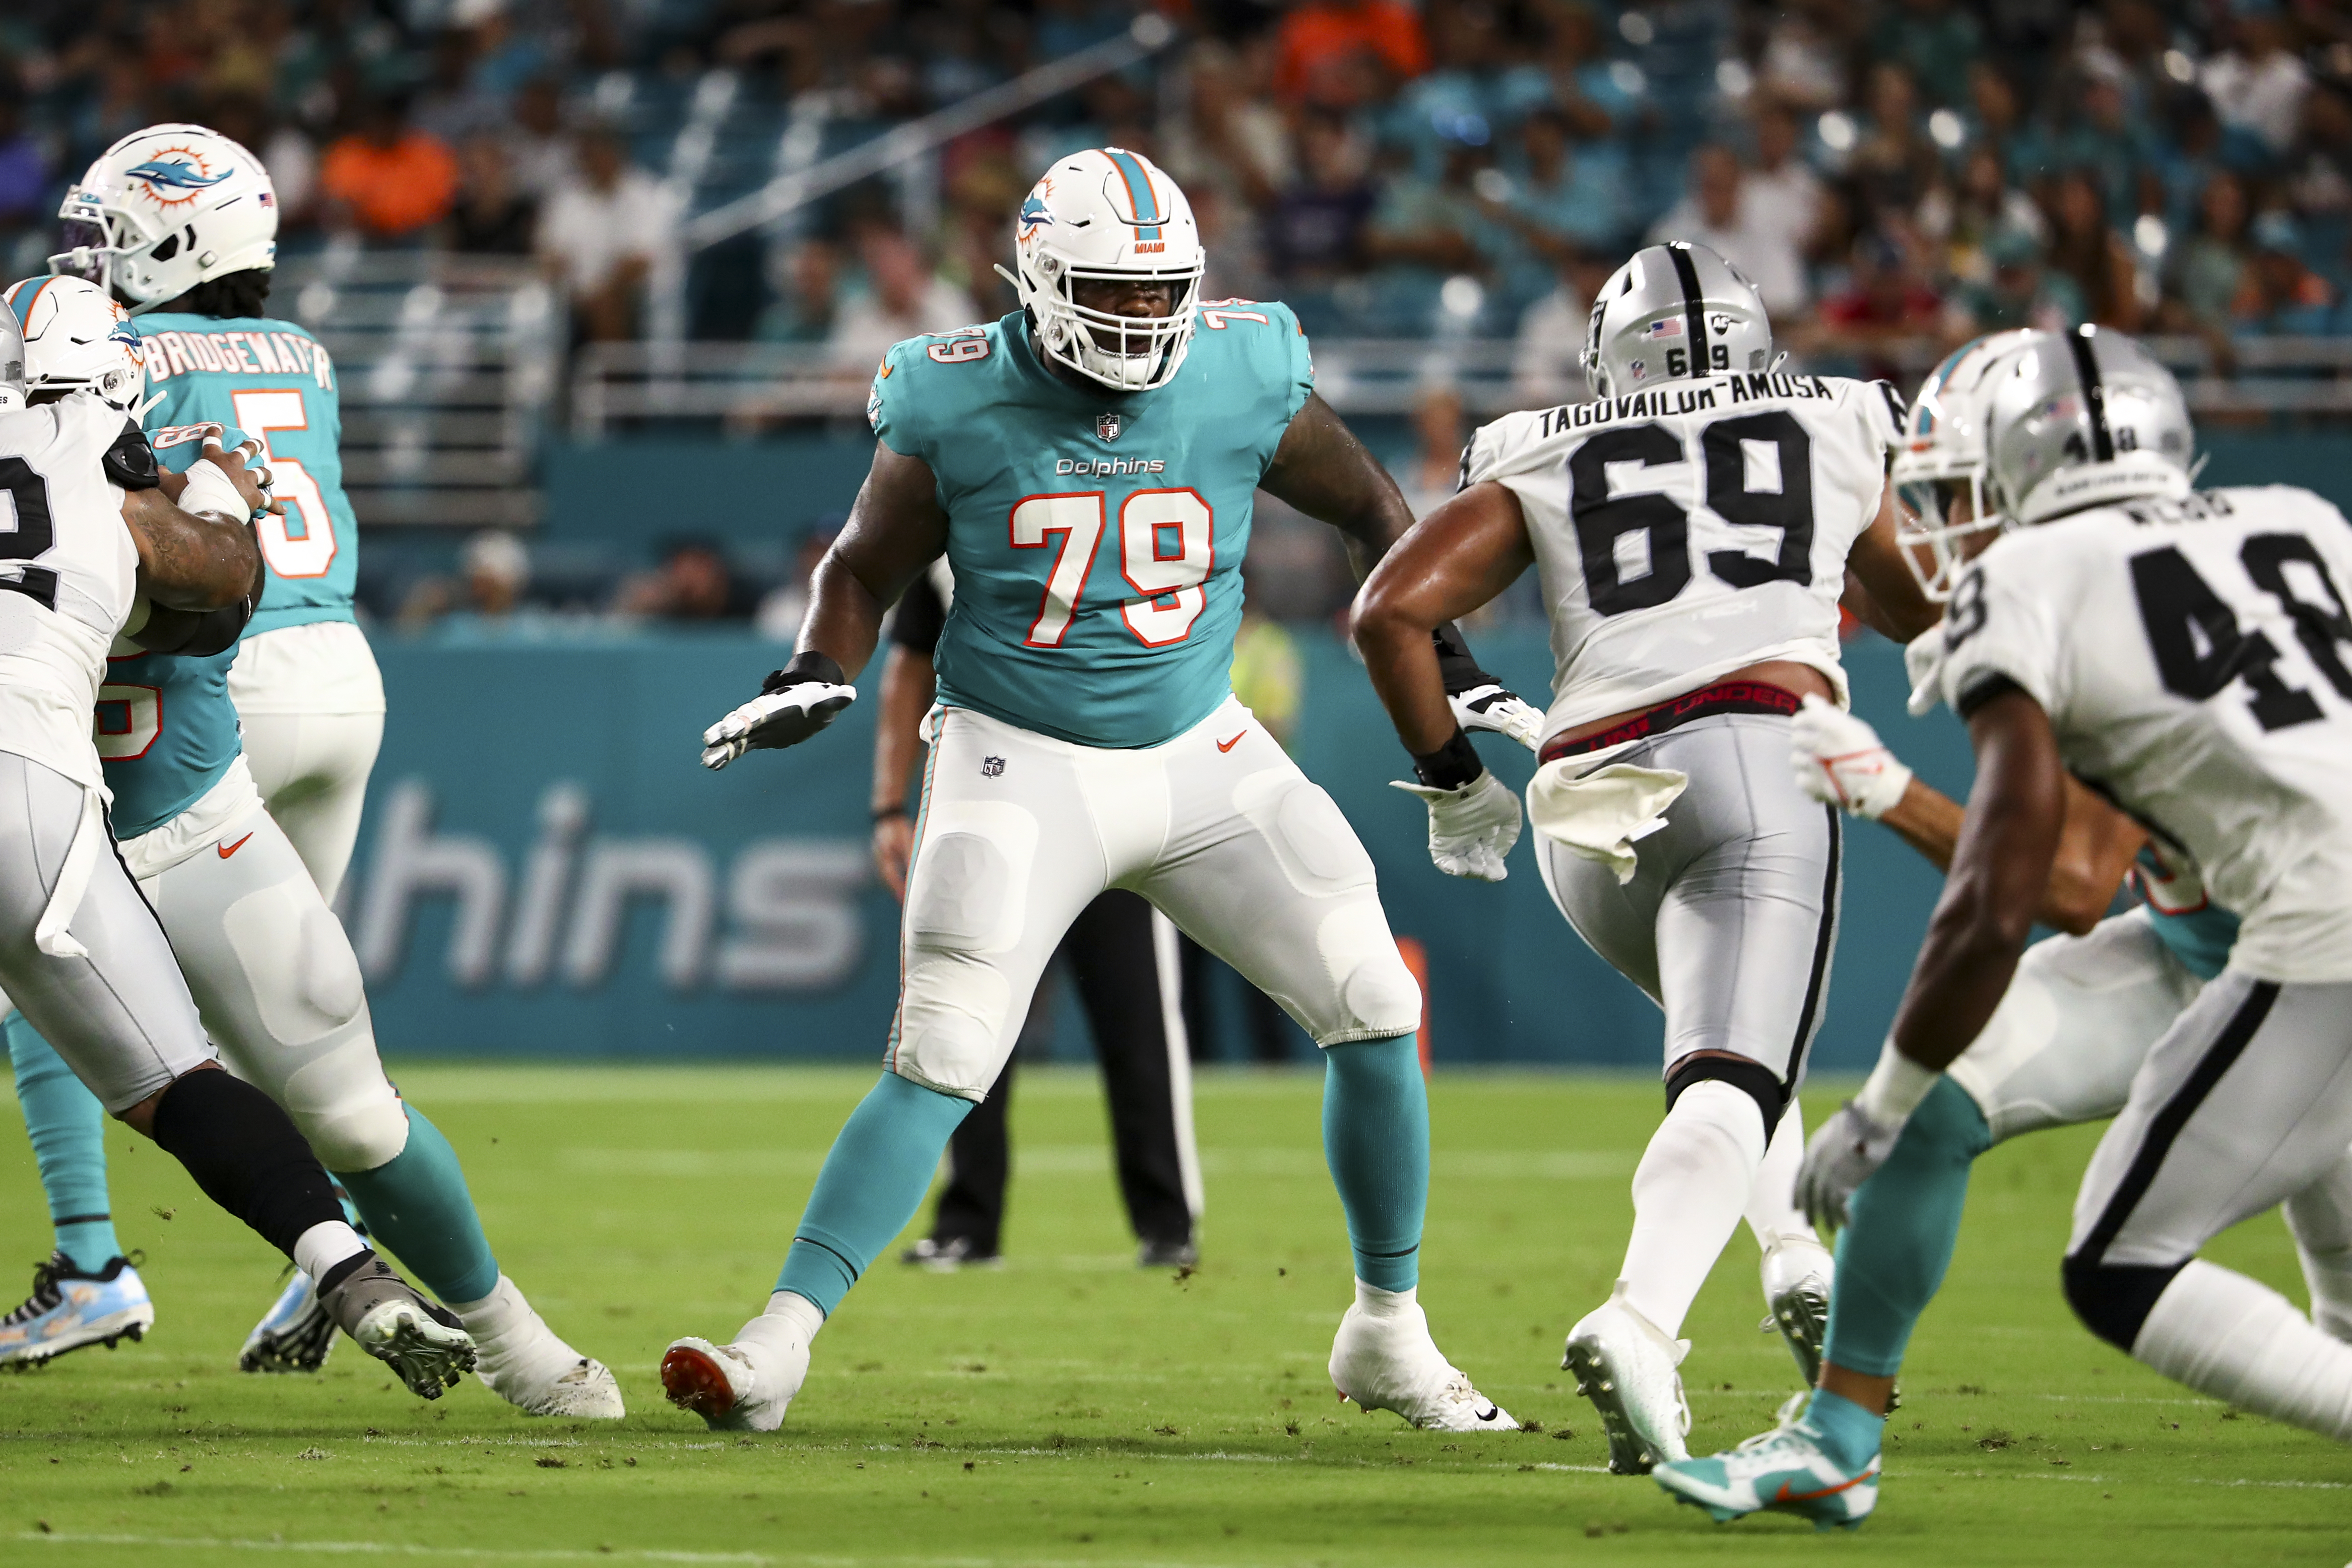 Larnel Coleman #79 of the Miami Dolphins blocks during a preseason NFL football game against the Las Vegas Raiders at Hard Rock Stadium on August 20, 2022 in Miami Gardens, Florida.